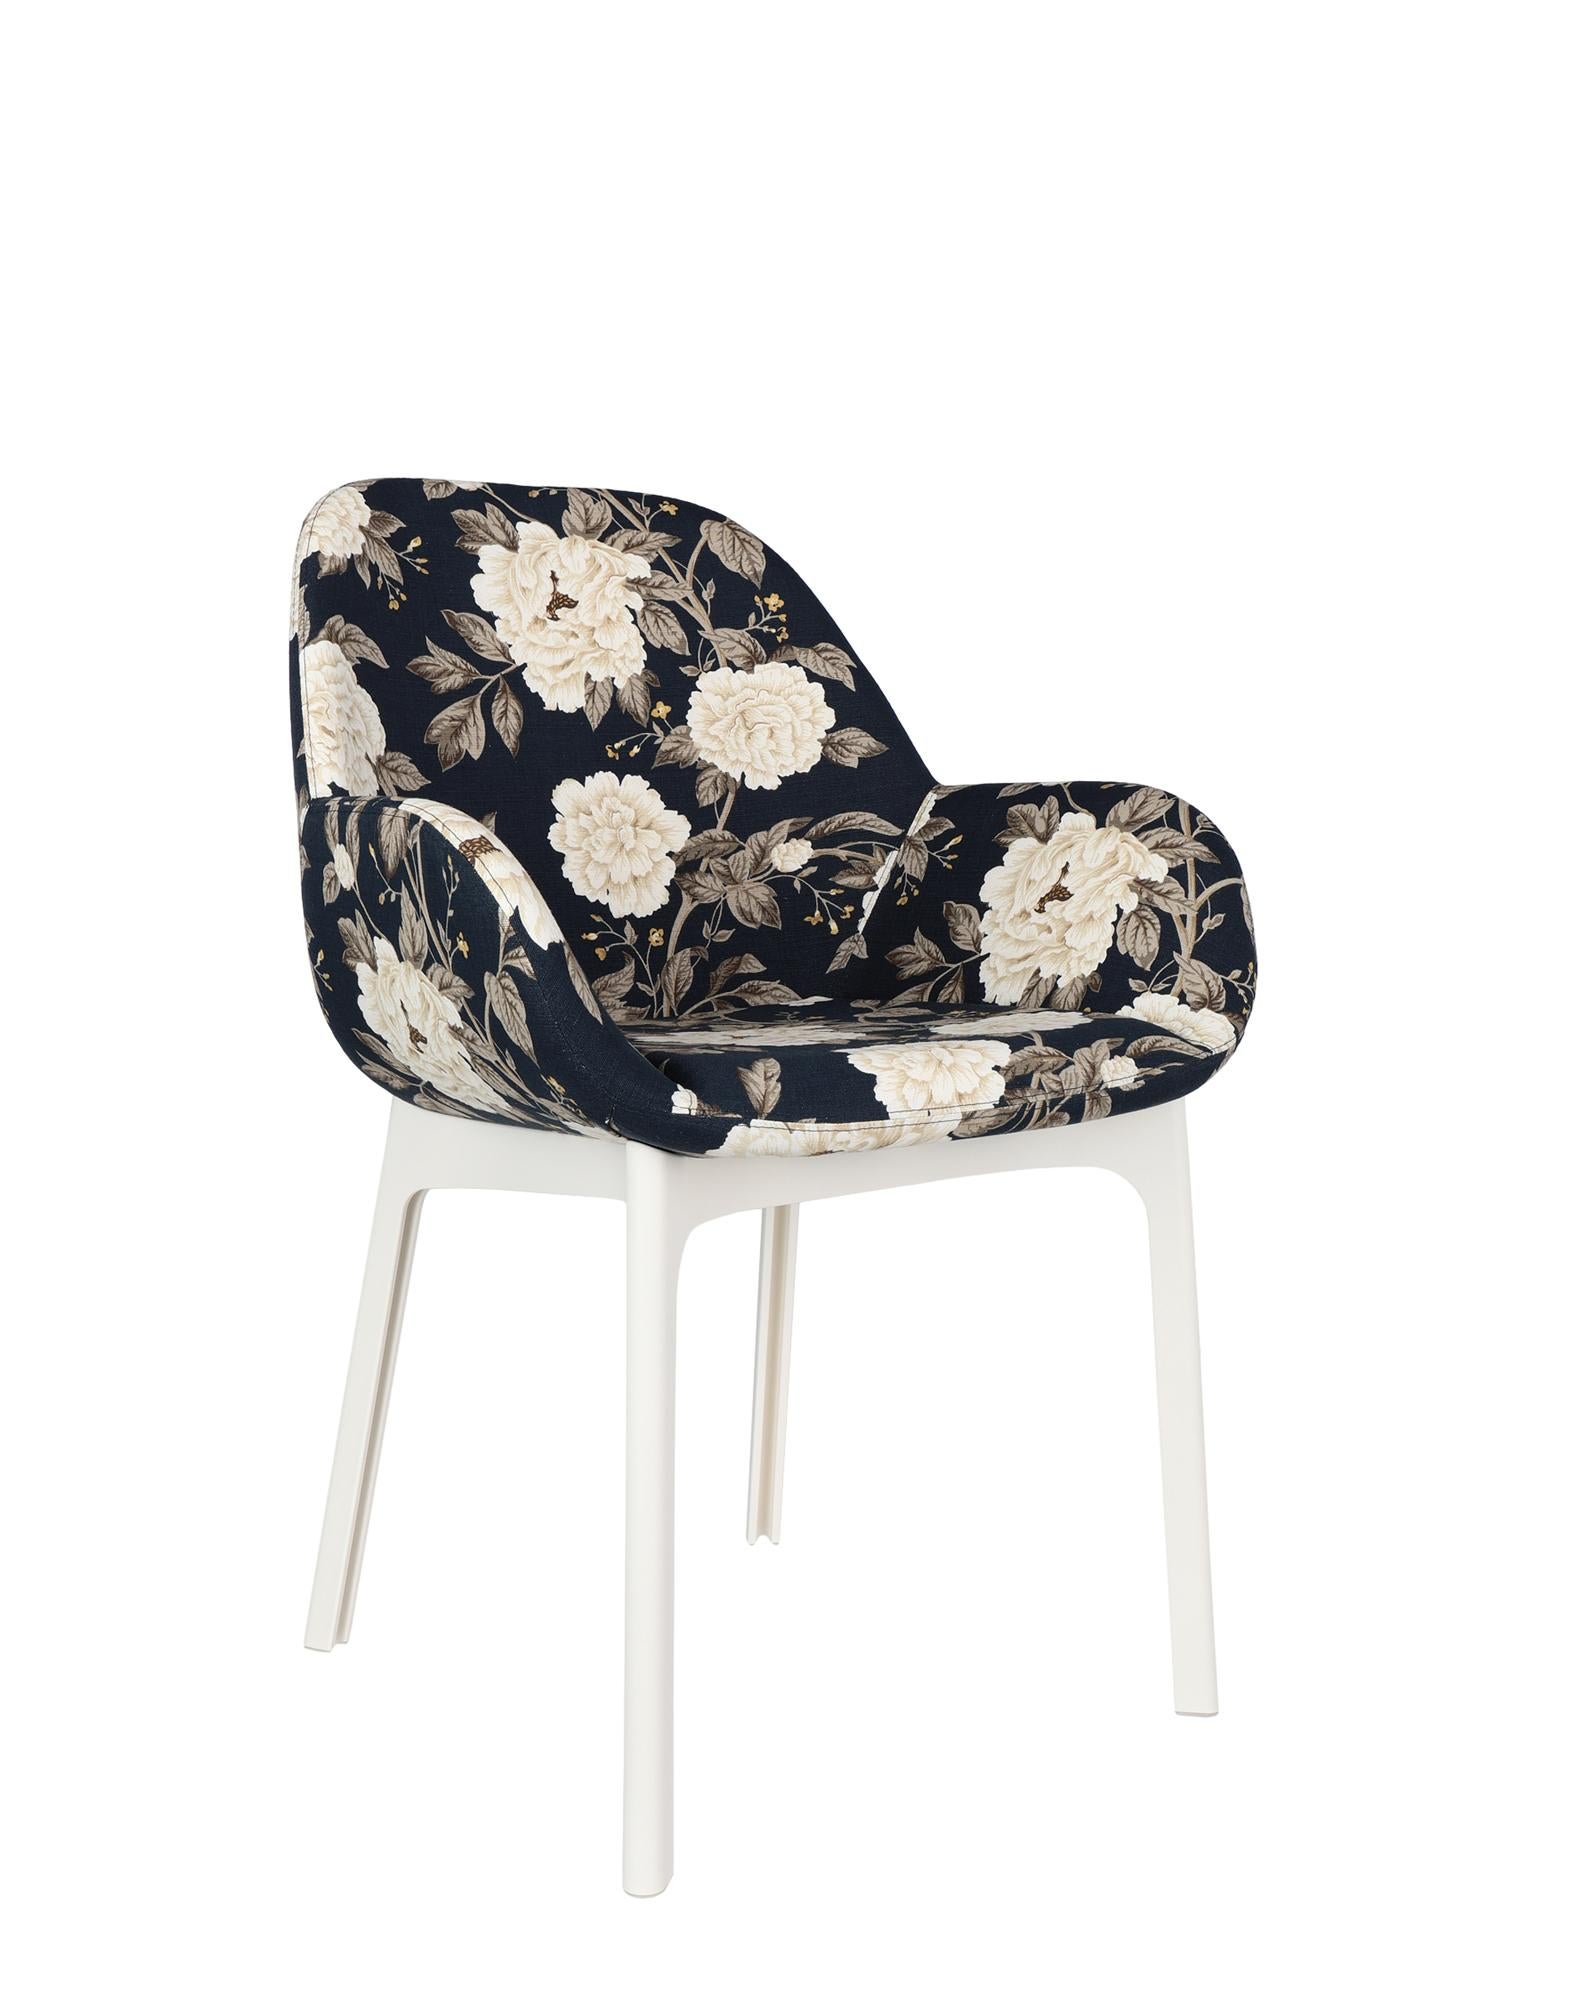 Modern Kartell Clap Chair by Patricia Urquiola in Peony Pattern For Sale